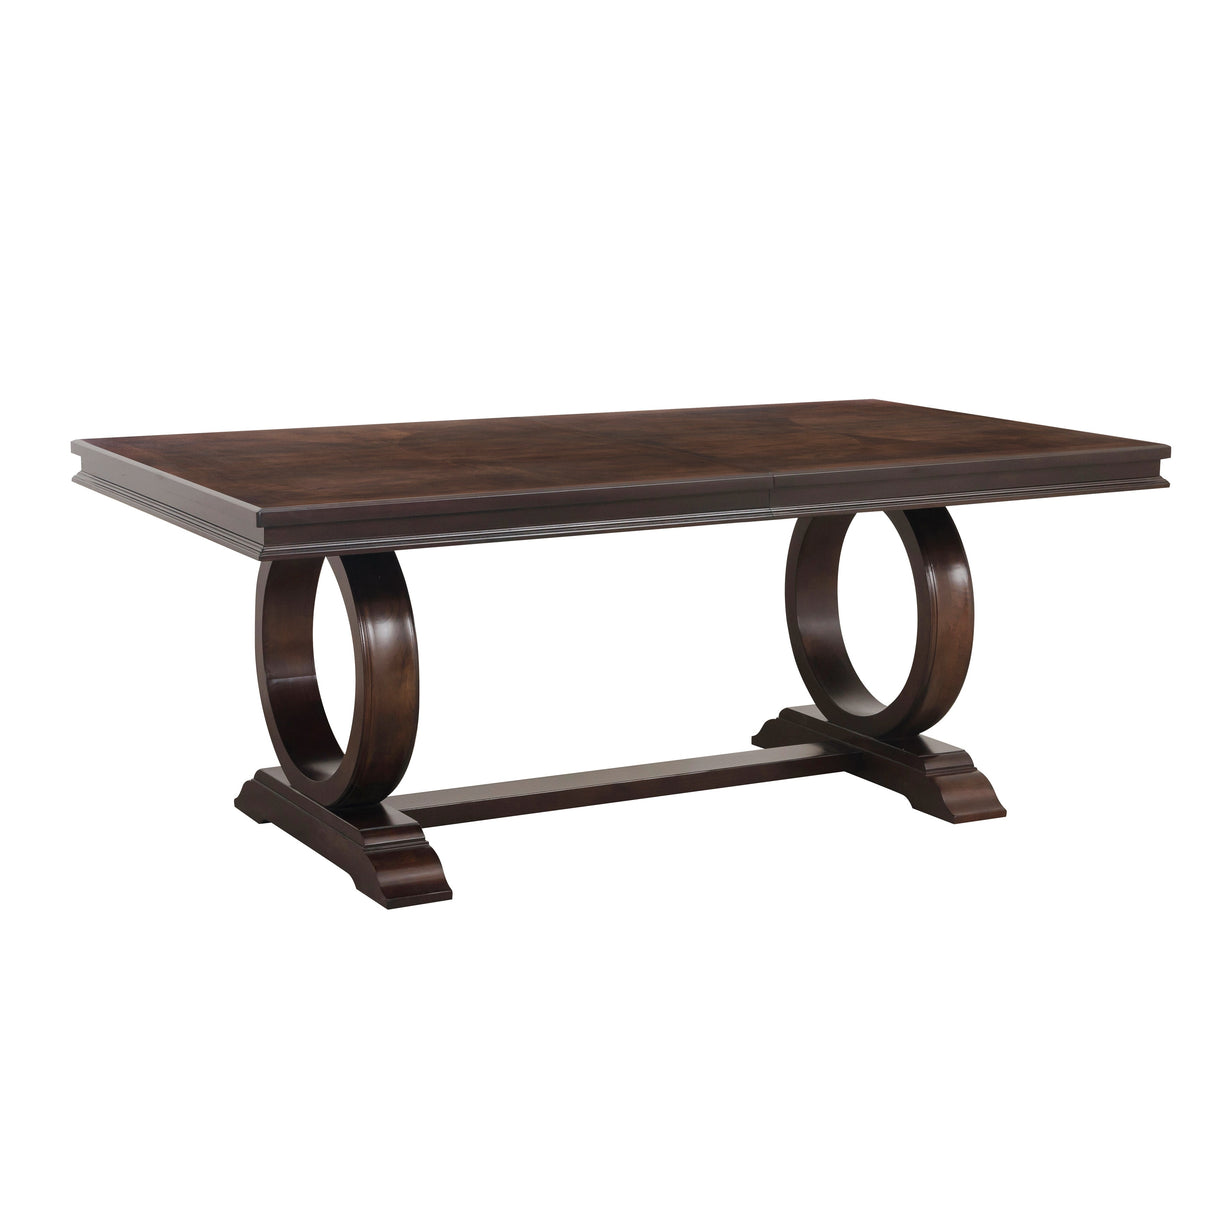 Oratorio Cherry Extendable Dining Table